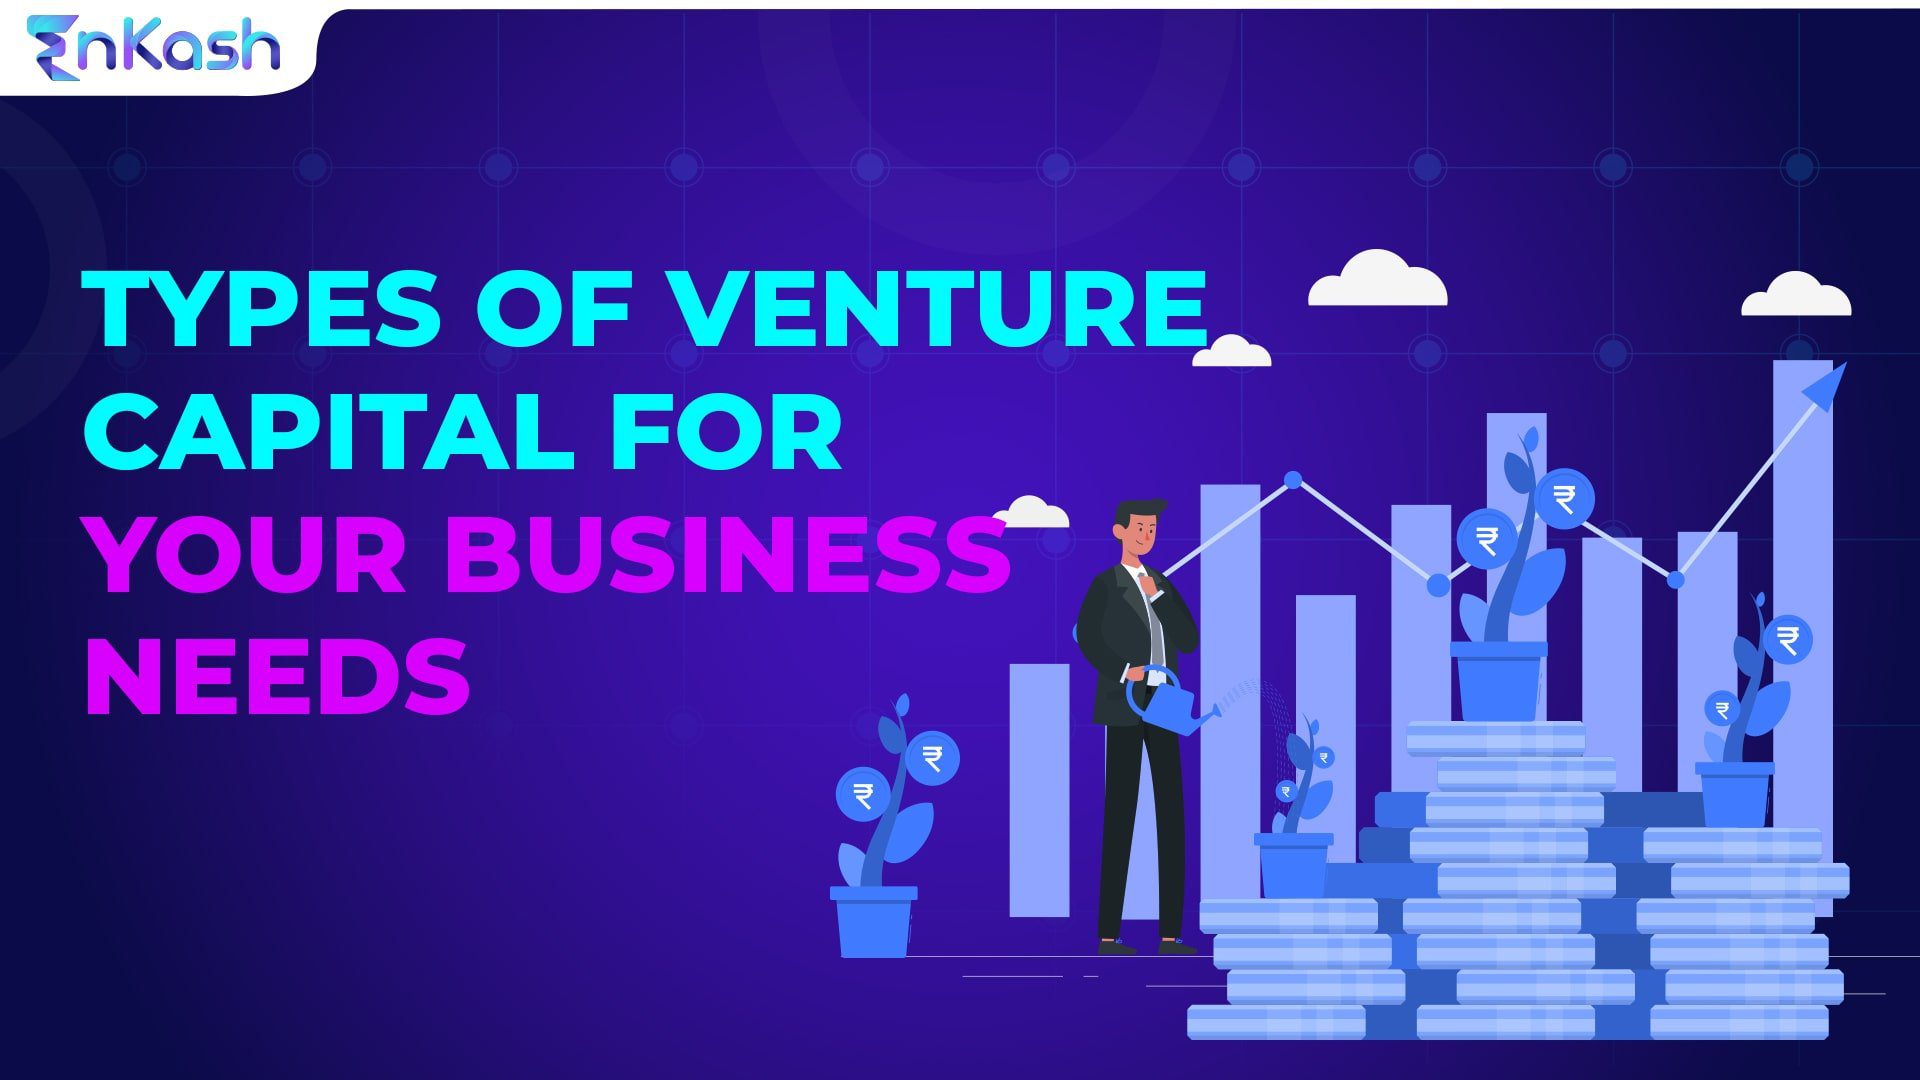 Types of venture capital for your business need